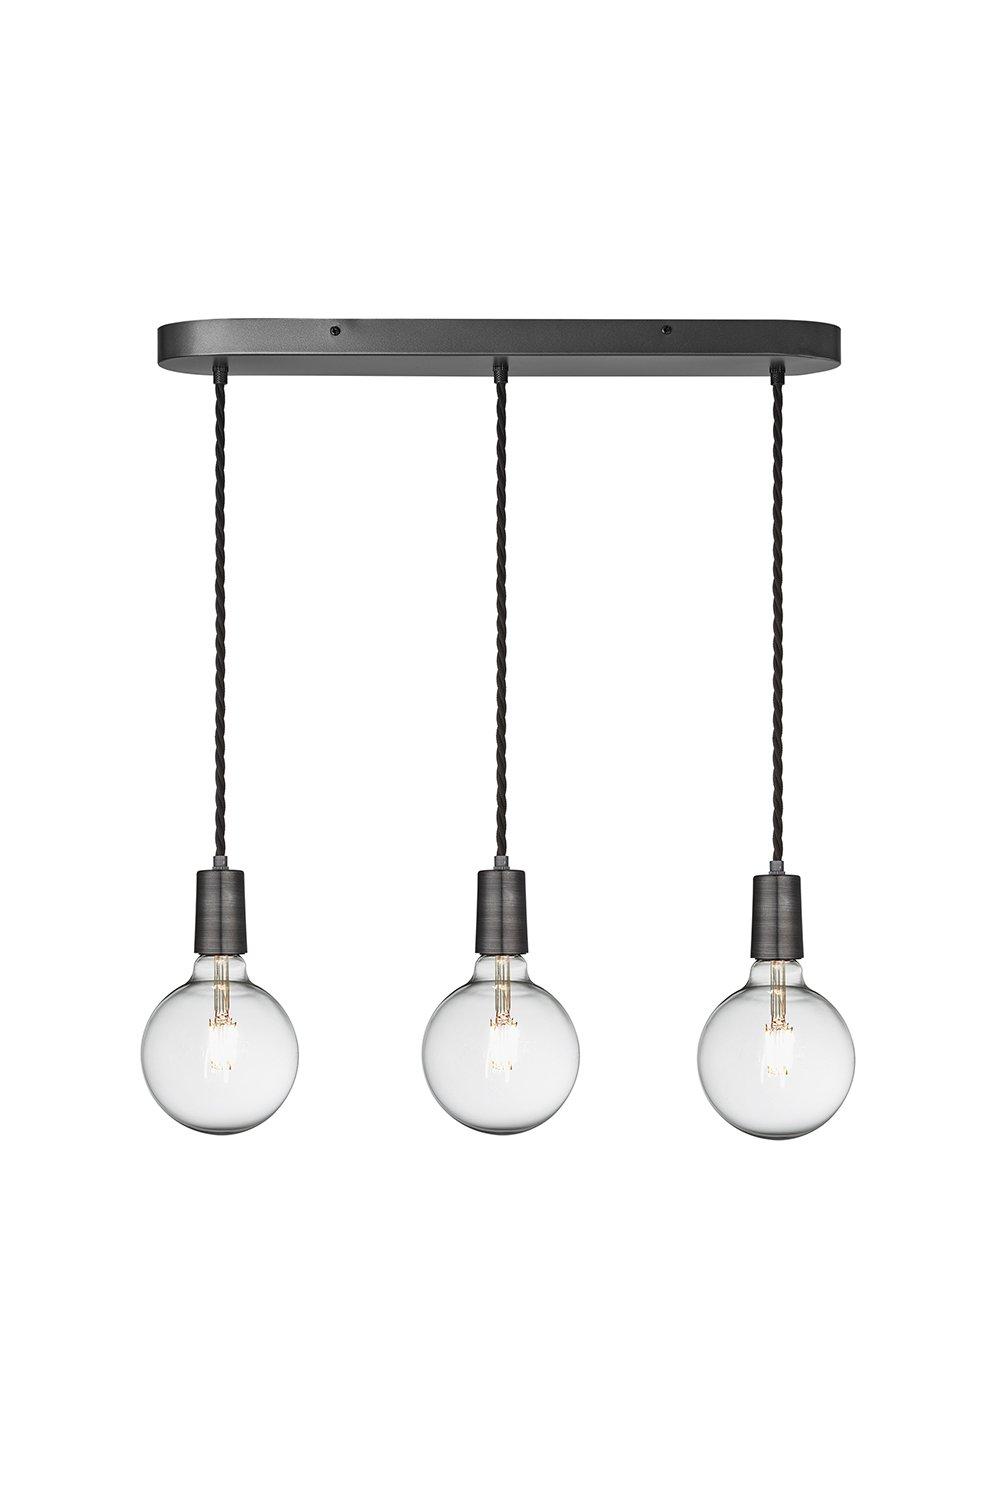 Sleek Edison Oval Cluster Lights, 3 Wire, Pewter